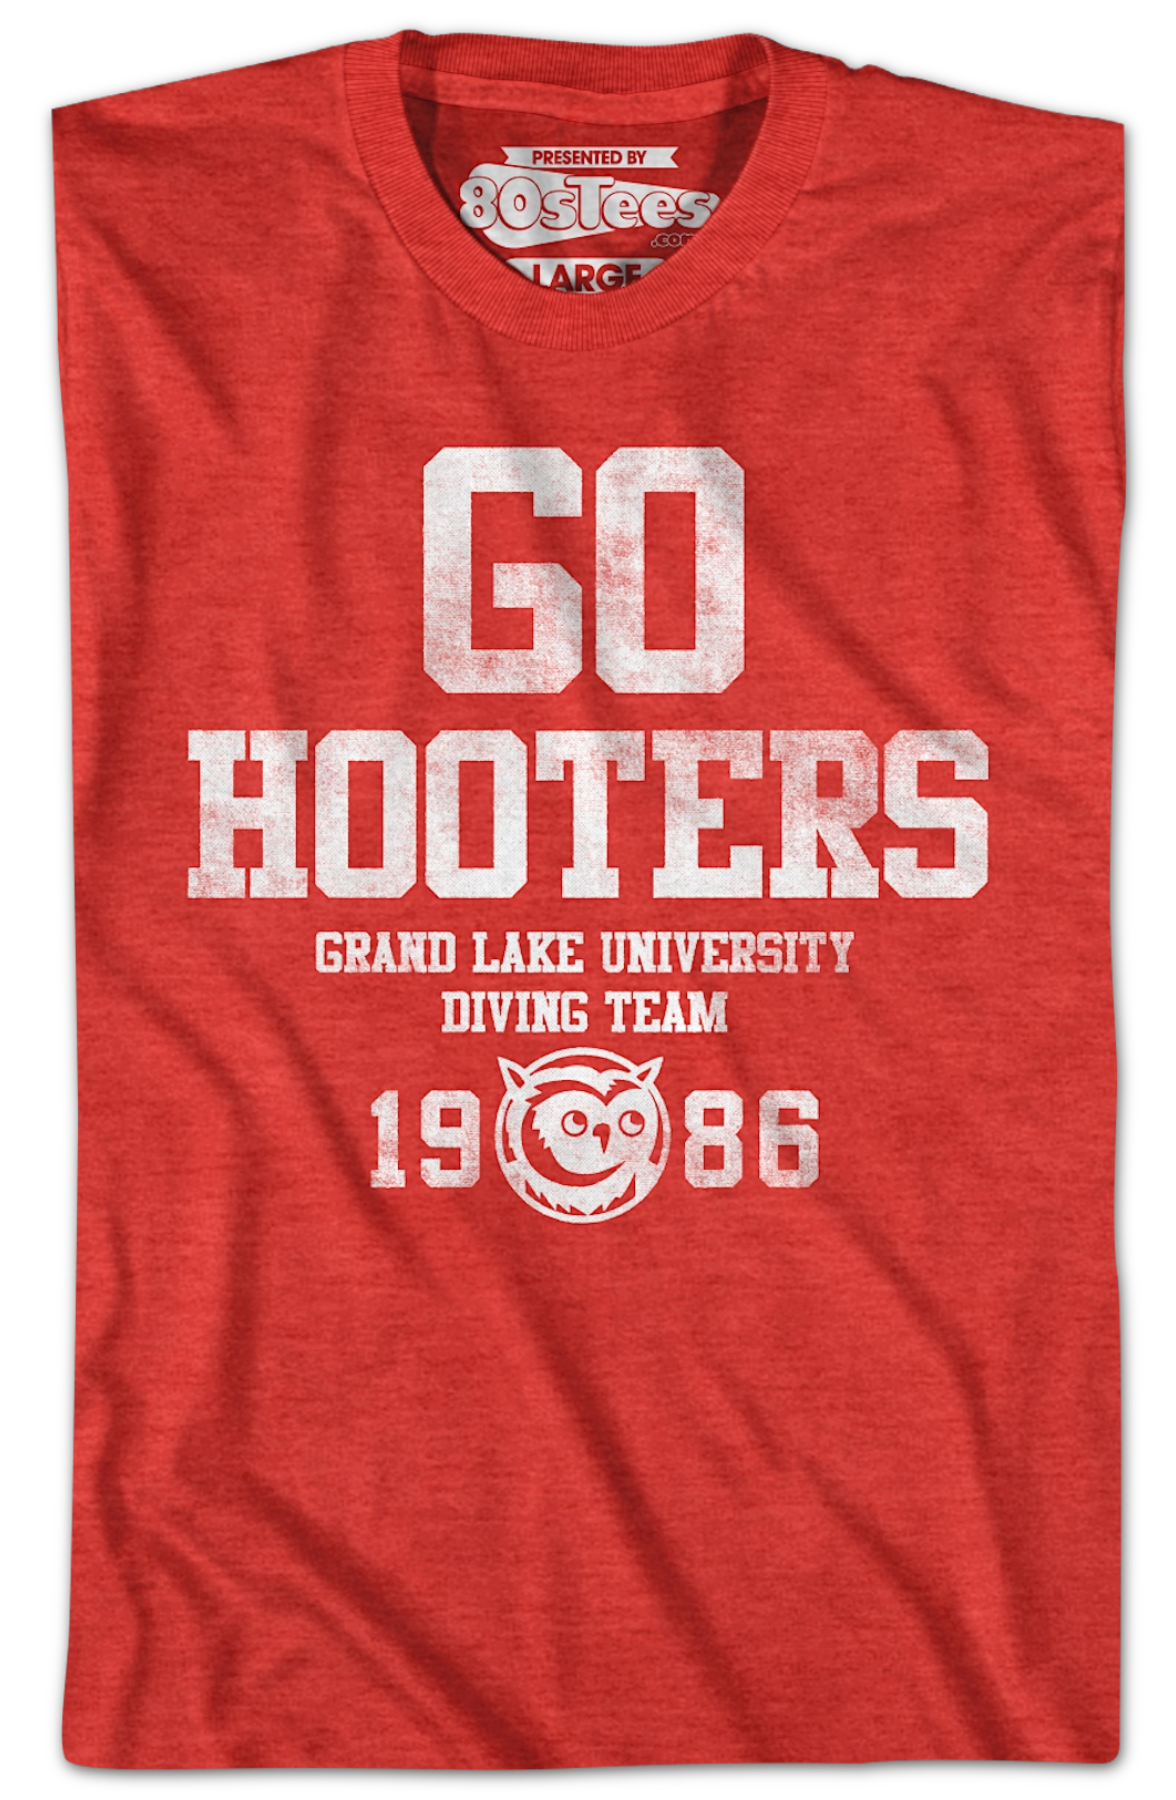 Go Hooters Back To School T-Shirt